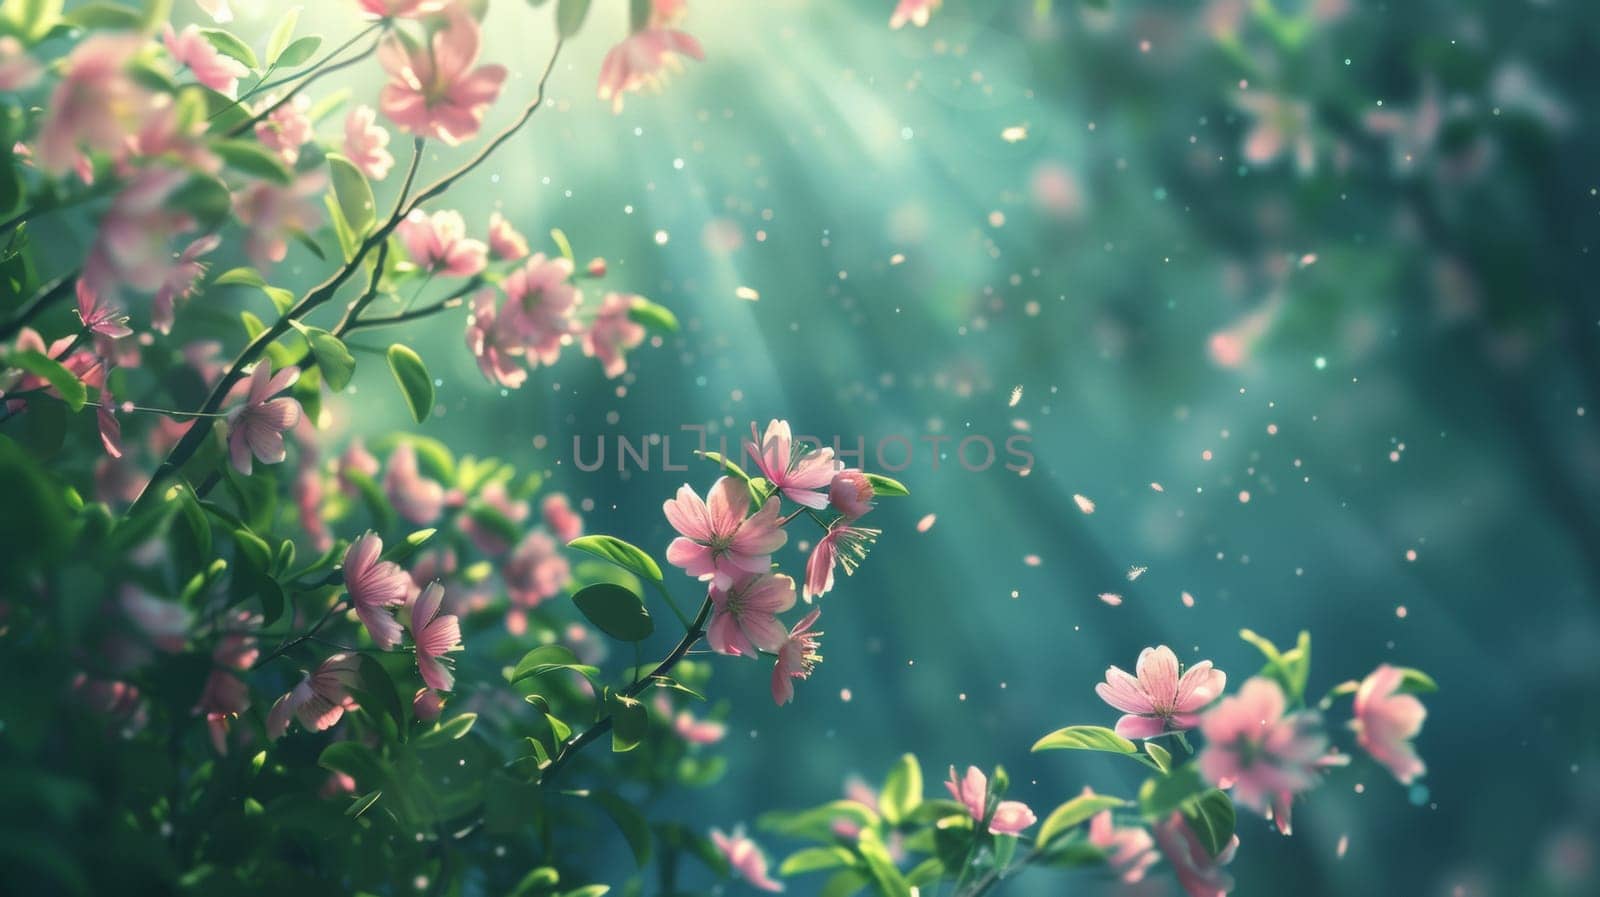 A close up of a bunch of pink flowers with sunbeams